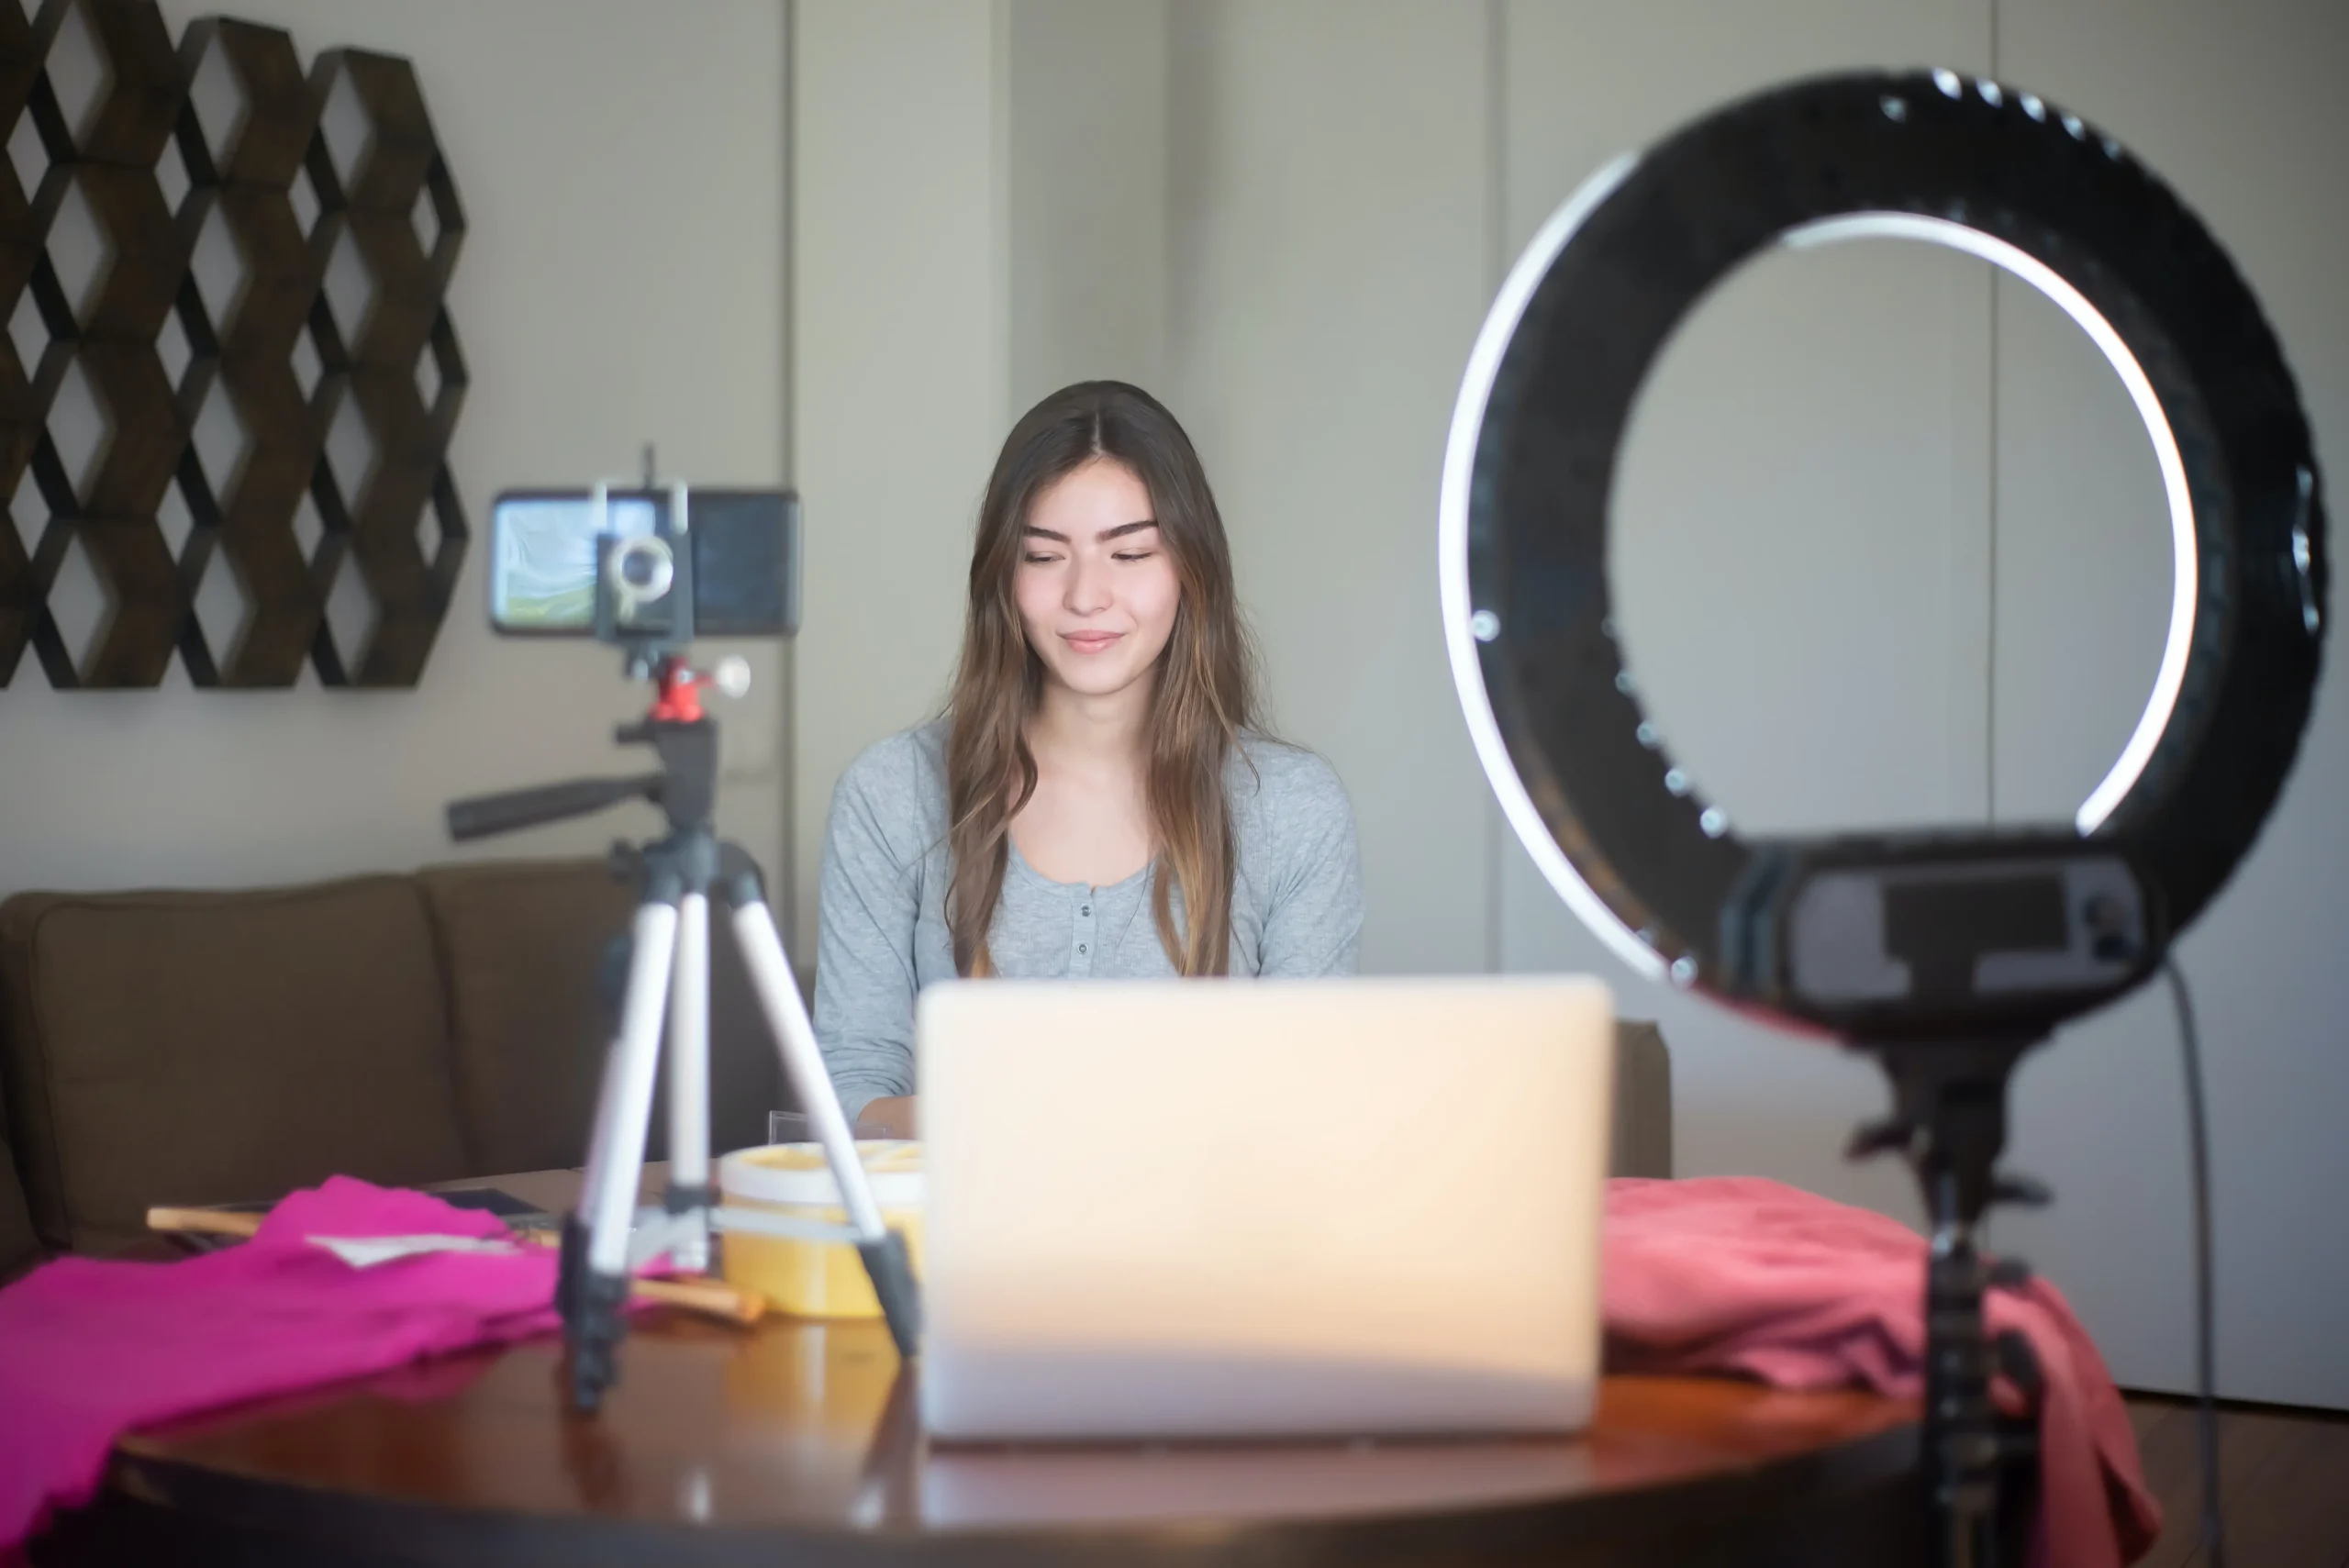 This image describes an Influencer doing vlogging with a smartphone camera, a ring light and a laptop in front of her.